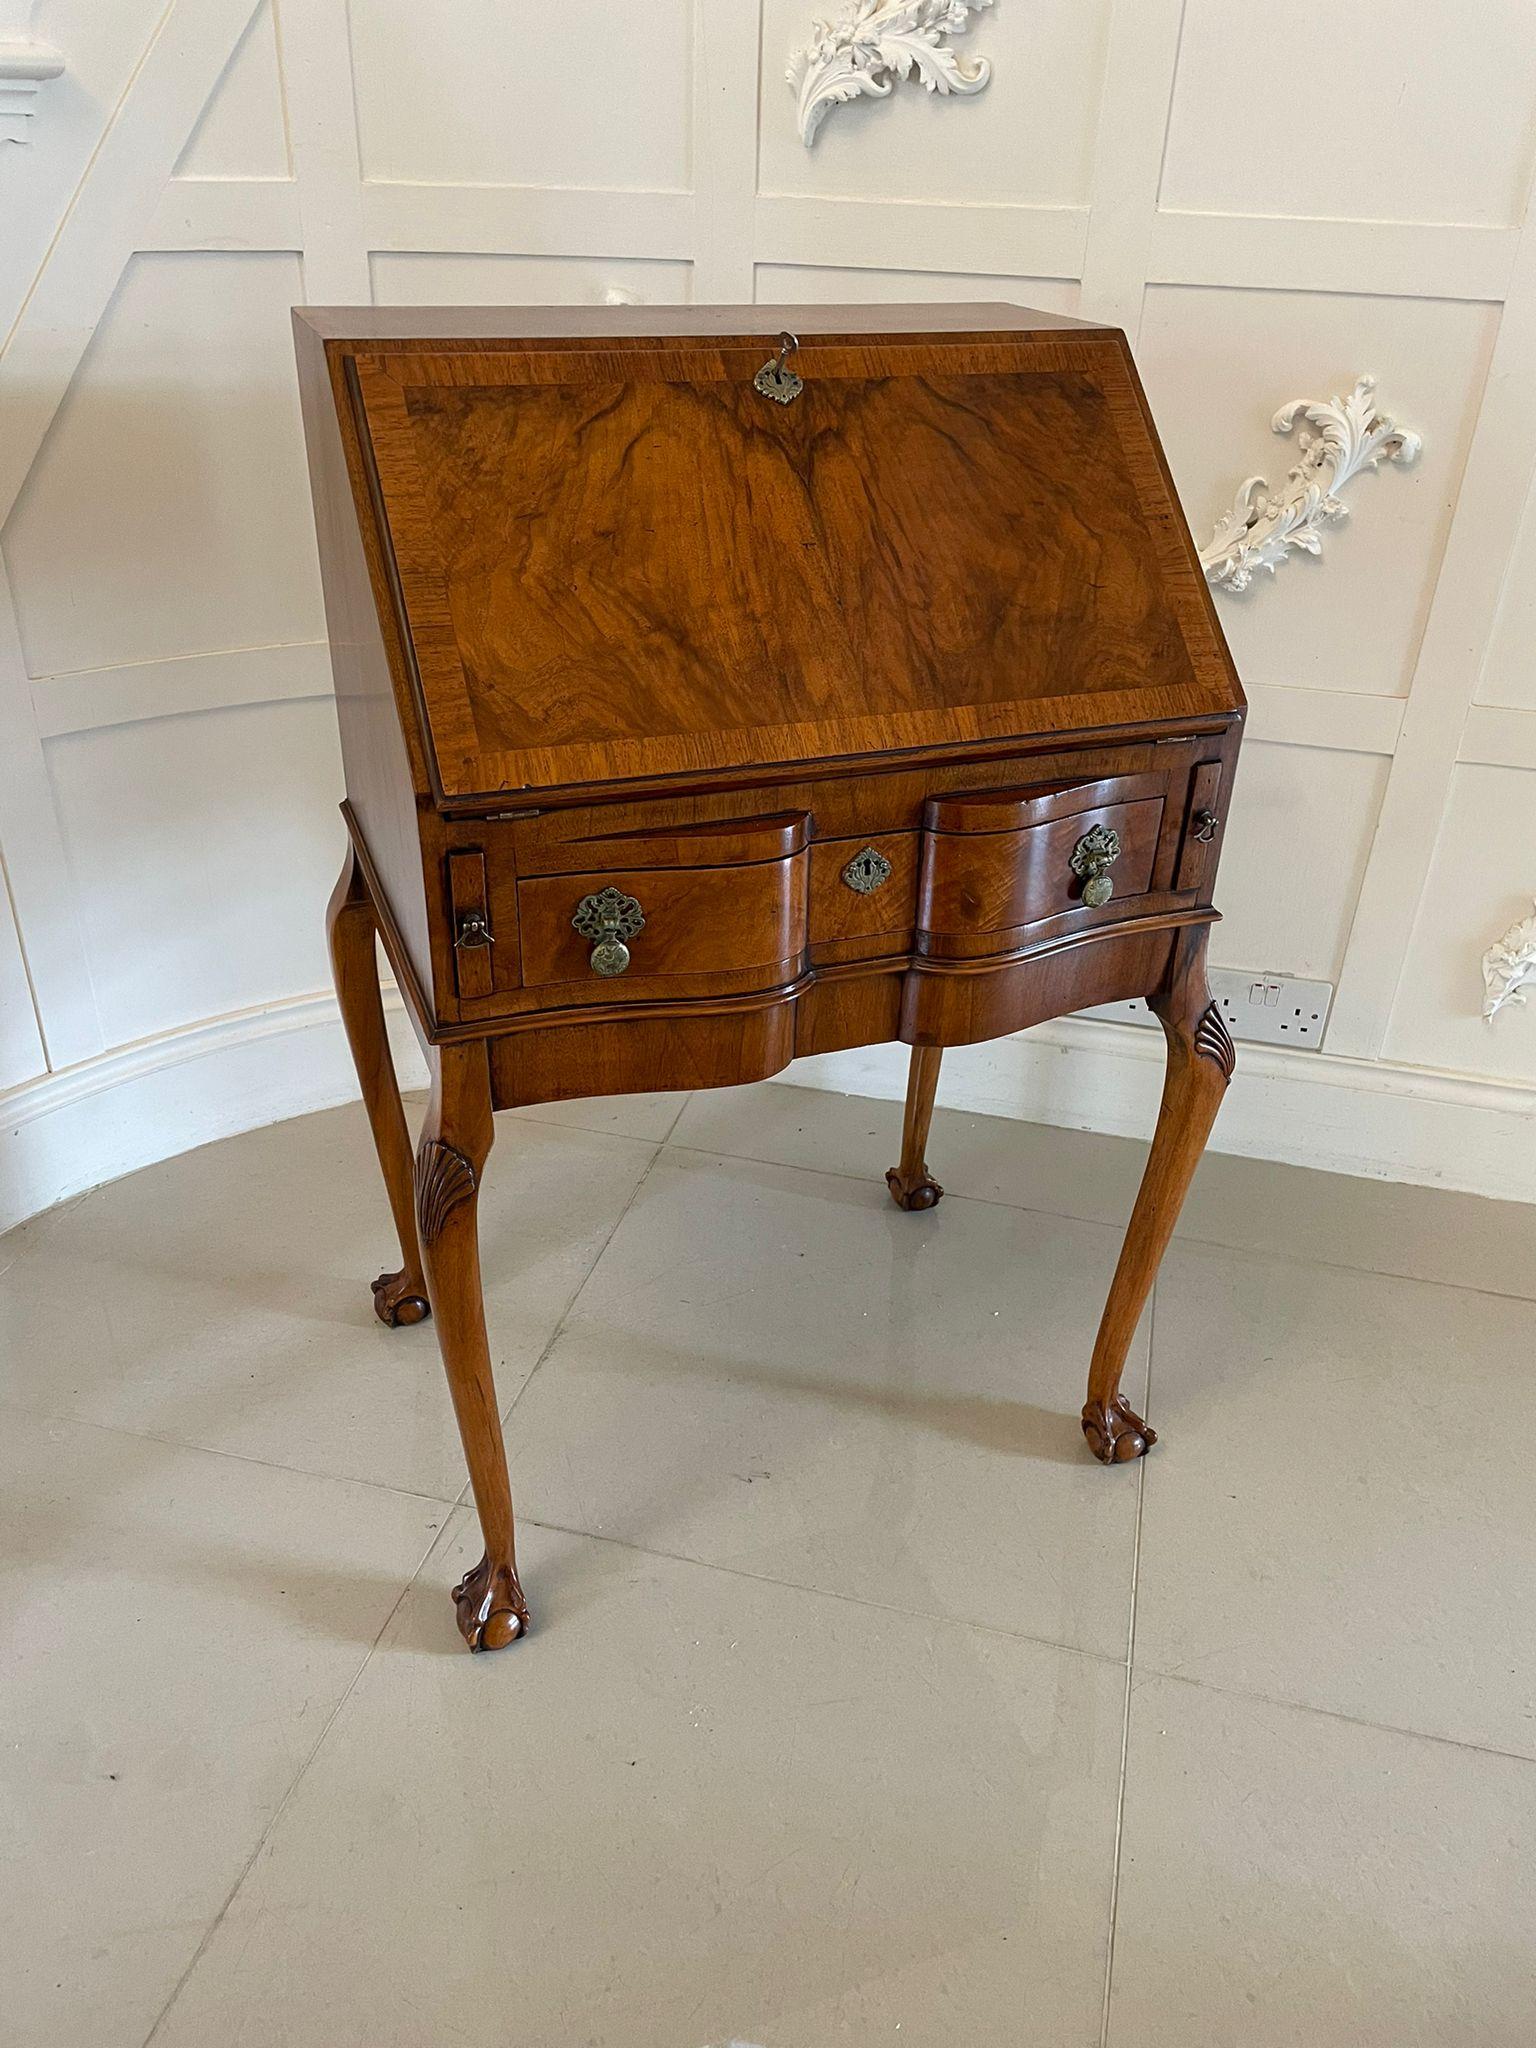 Antique quality burr walnut bureau having a quality burr walnut top above a burr walnut crossbanded fall opening to reveal a fitted interior consisting of a centre drawer flanked by pigeon holes above one long serpentine shaped burr walnut drawer